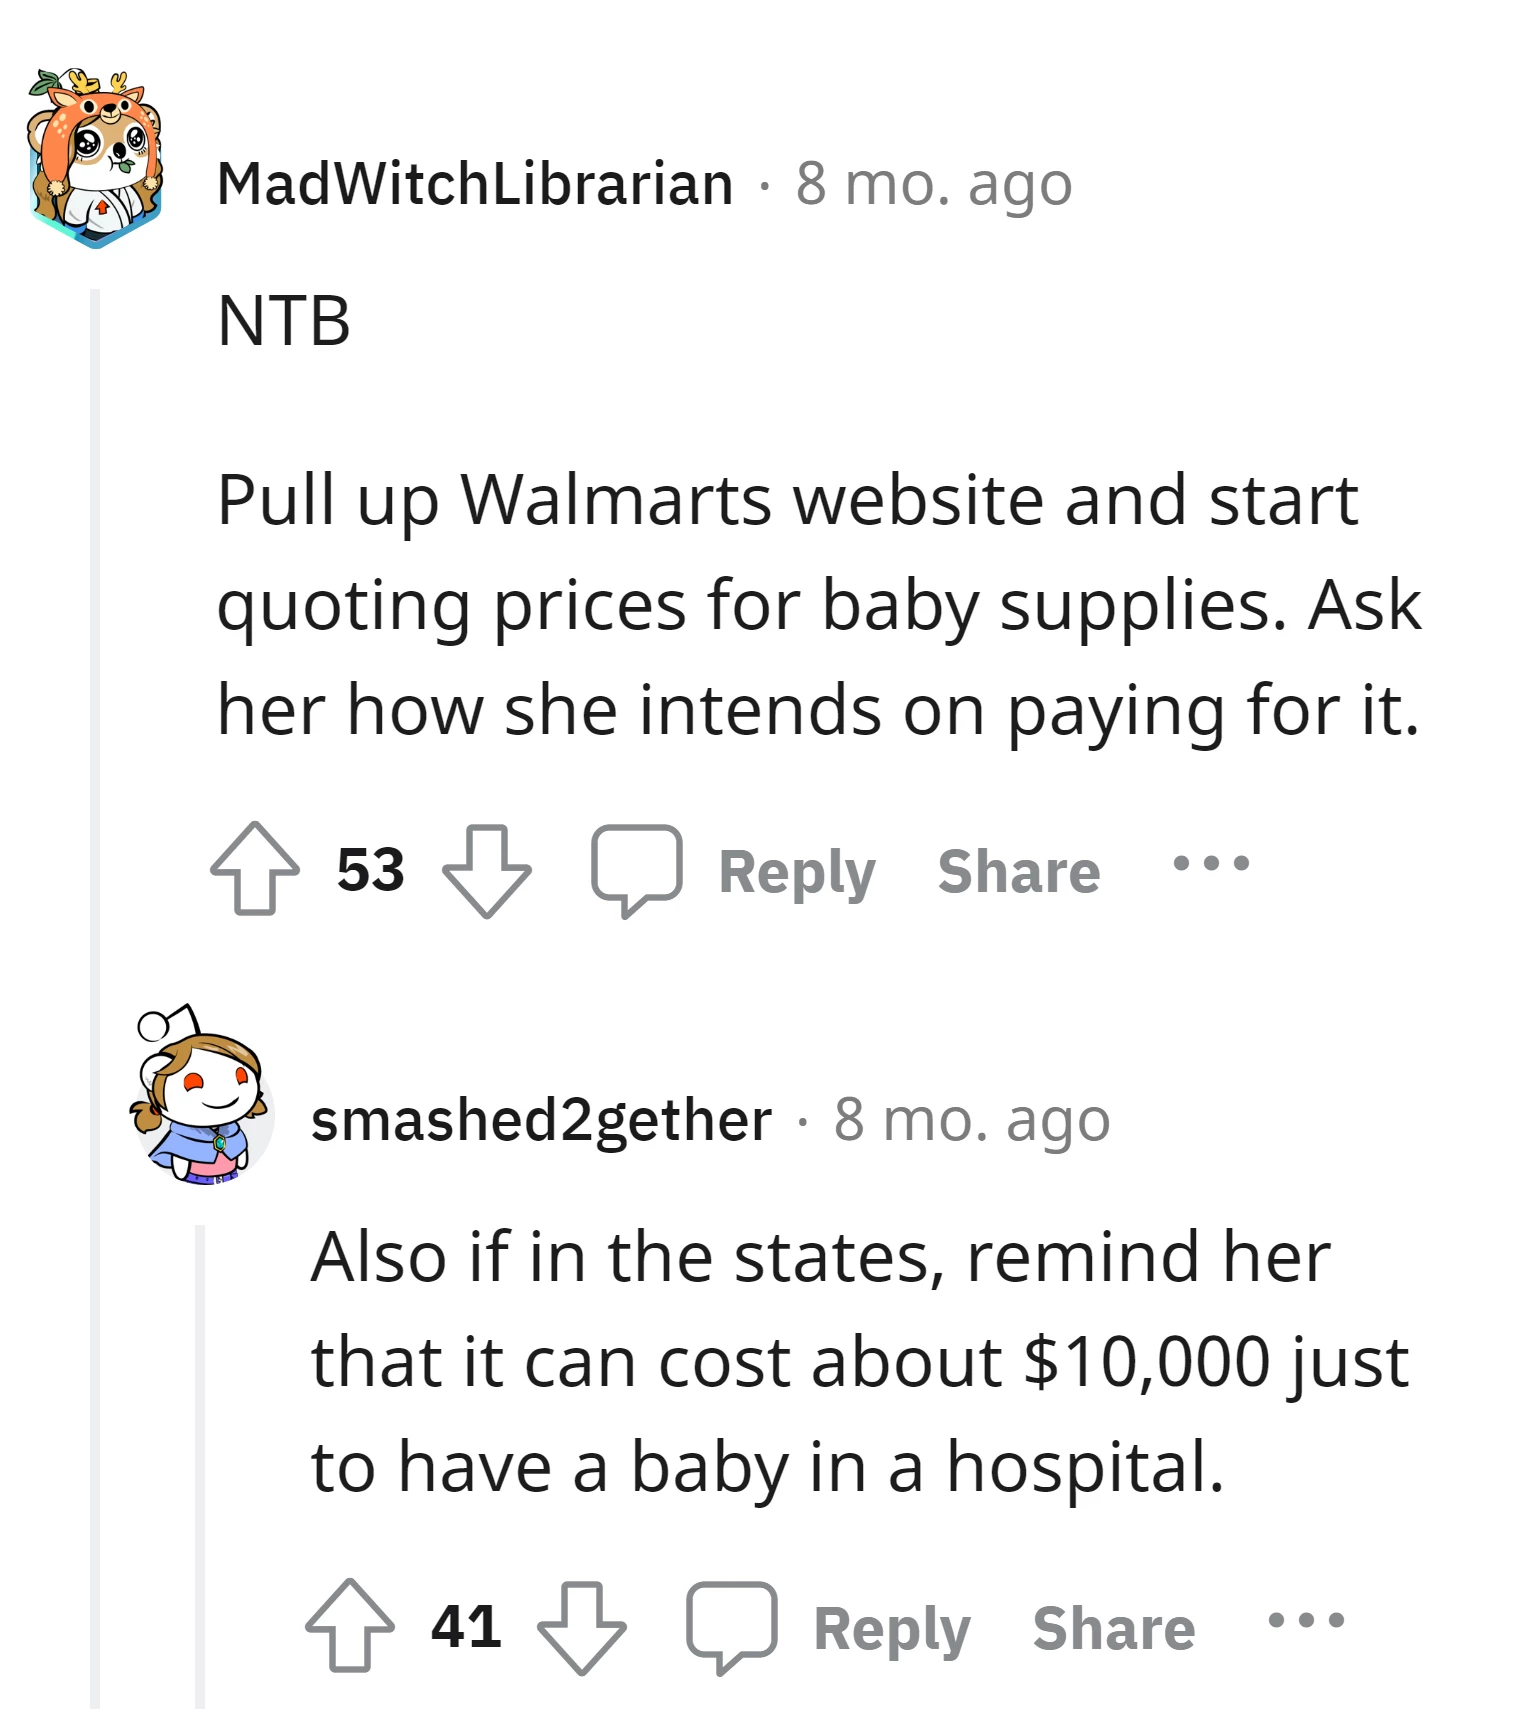 Check how much baby supplies cost on Walmart's website